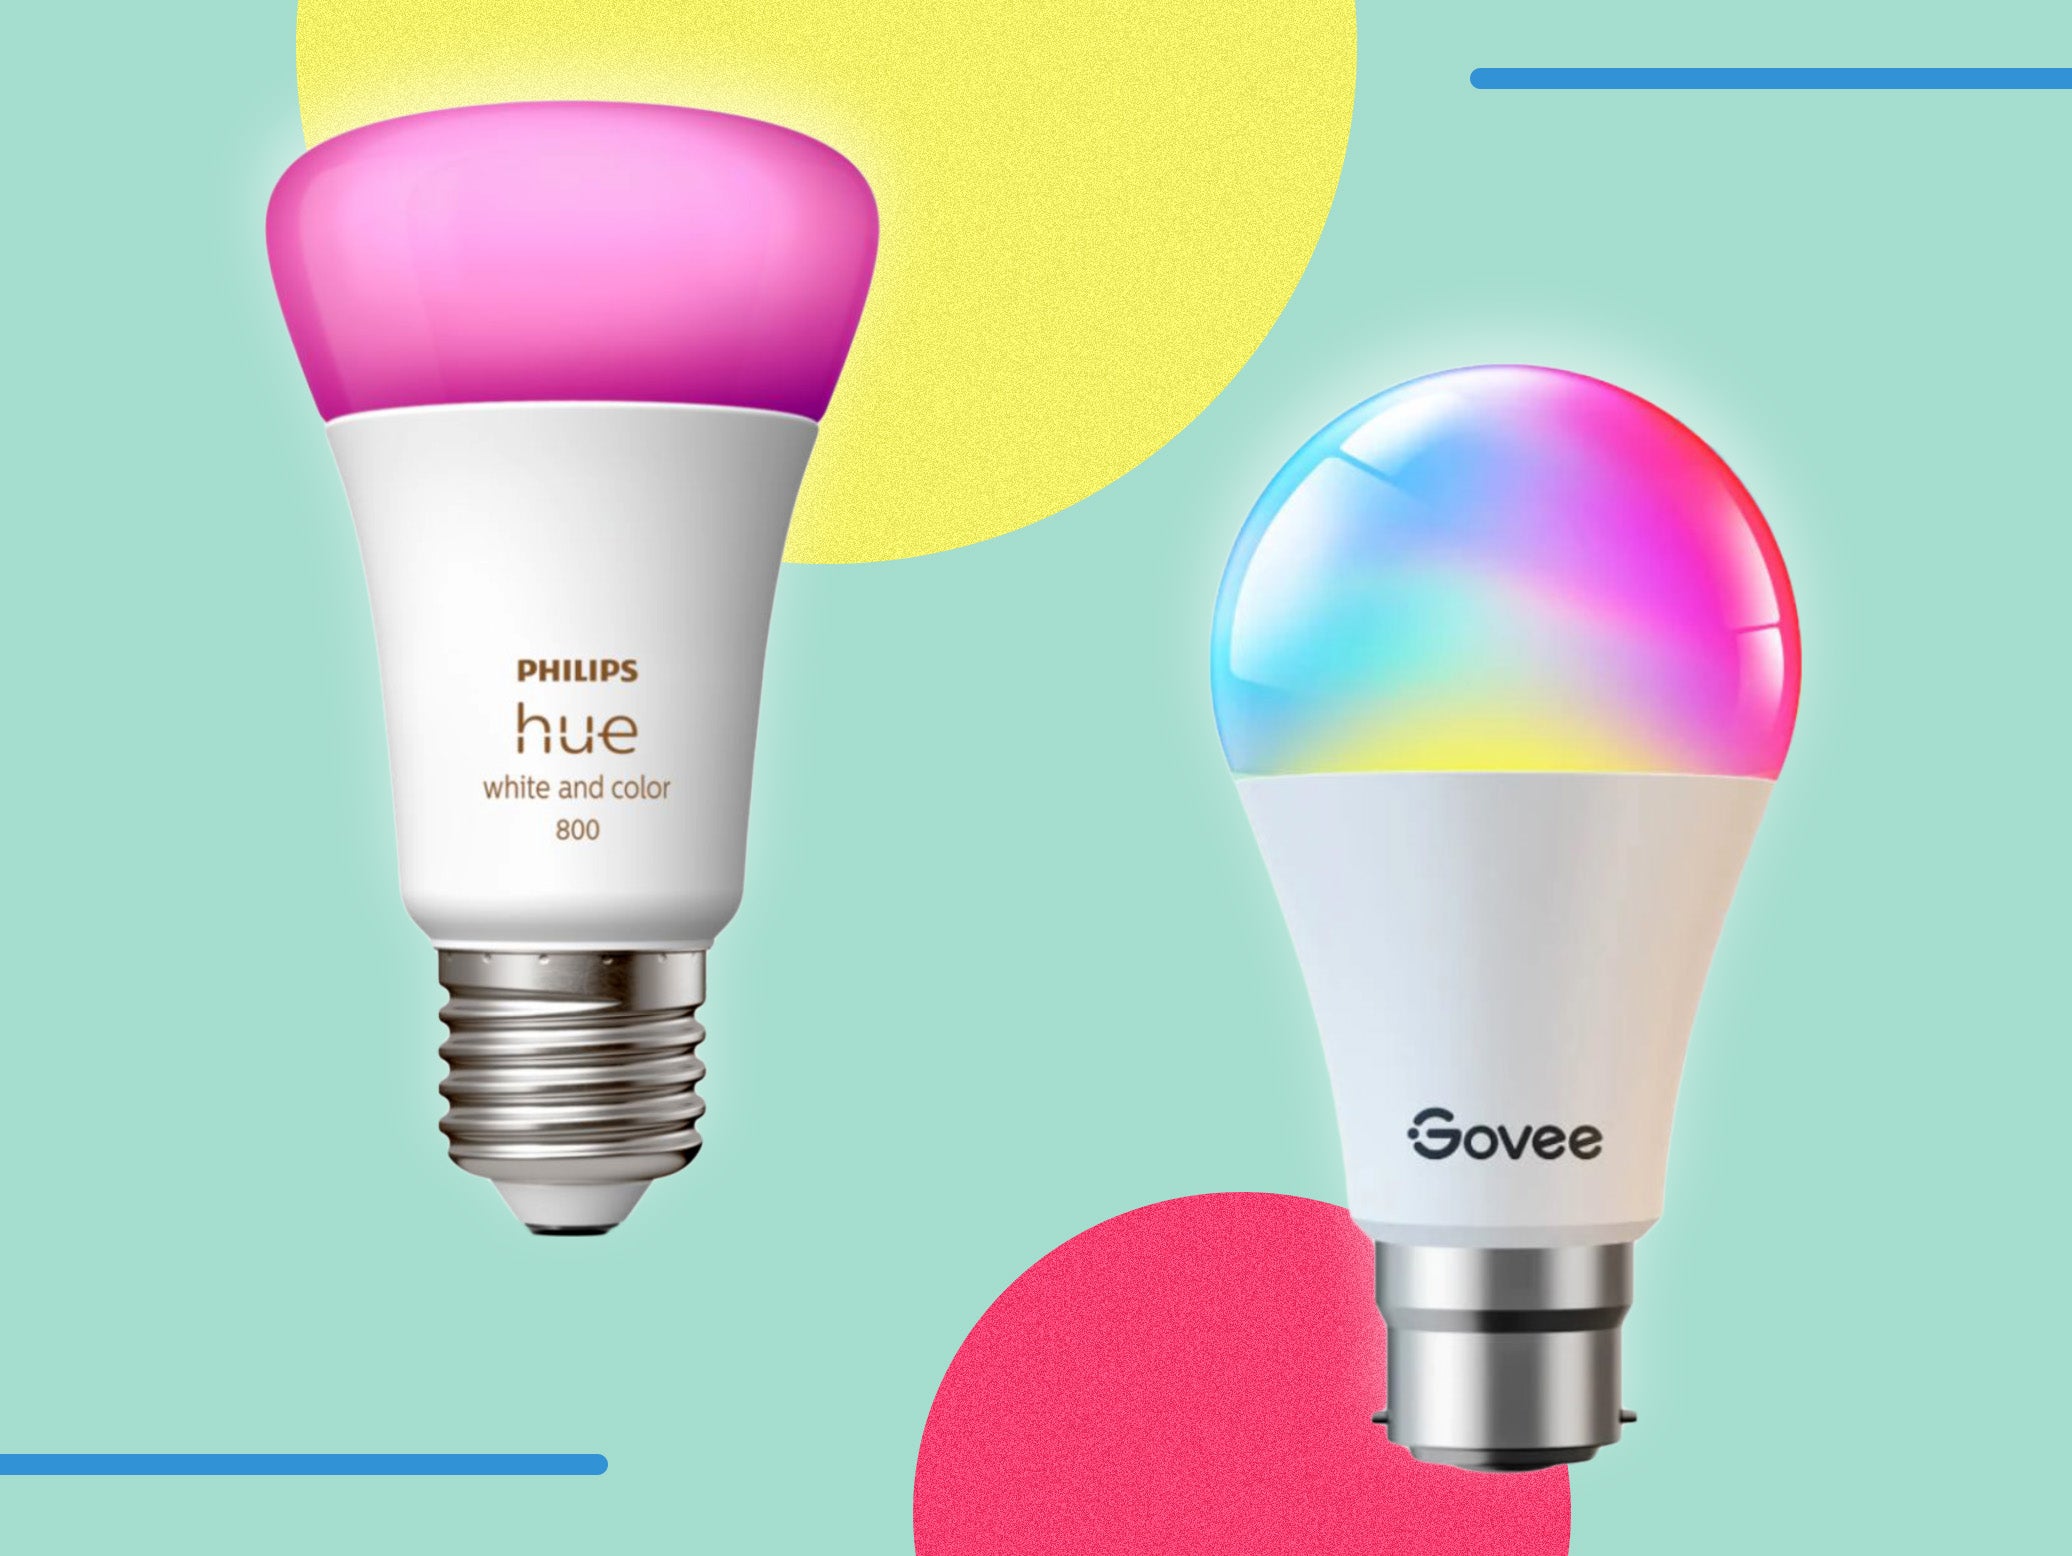 Elemental Margaret Mitchell Skriv email Phillips hue vs Govee: Which is the best smart lighting system for your  home? | The Independent